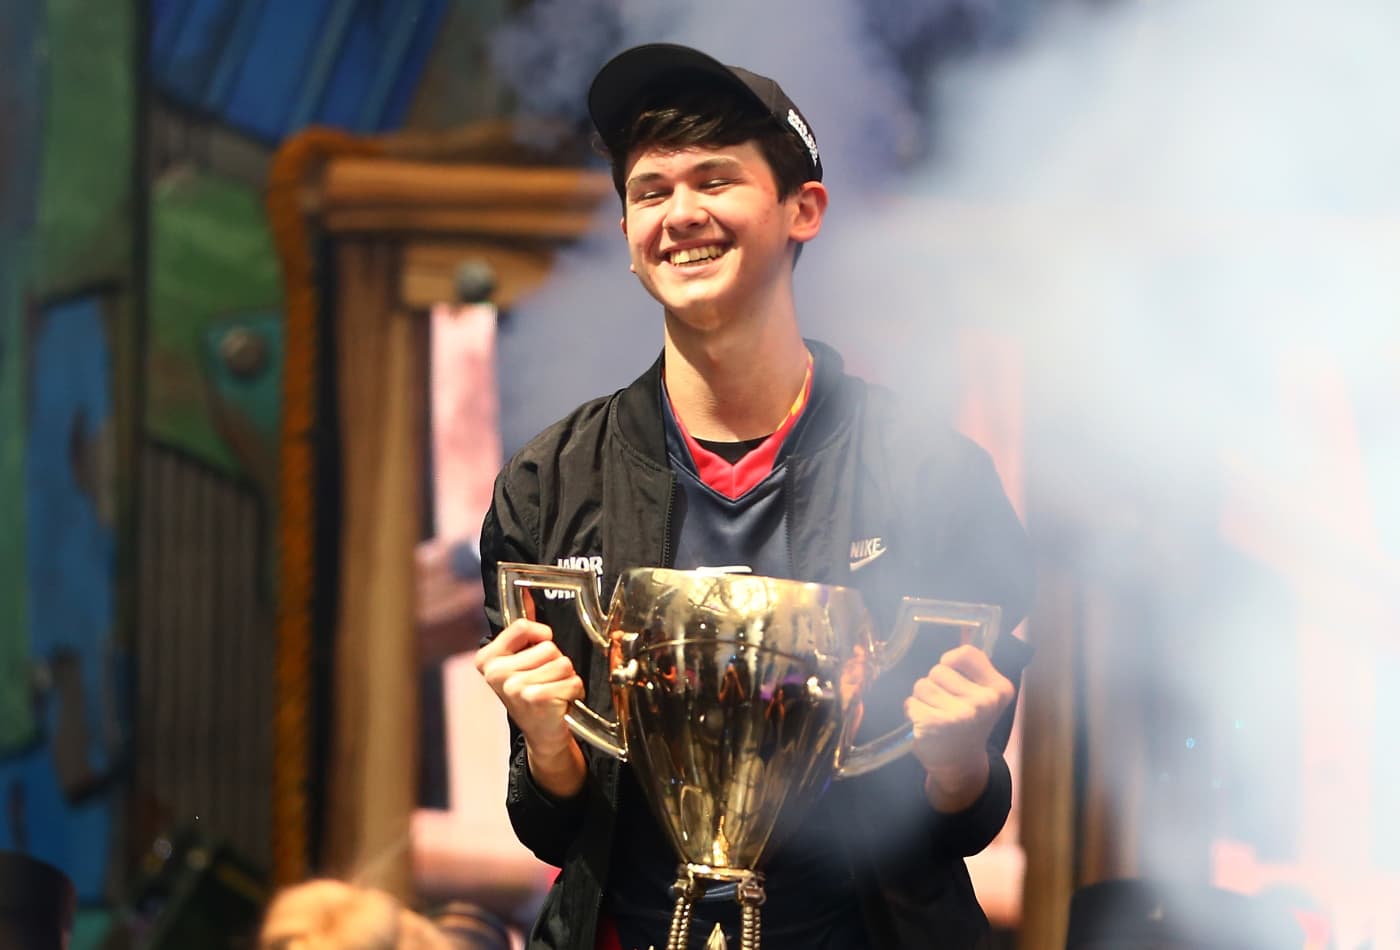 Teen Fortnite Champ Who Won 3 Million Practices 6 Hours A Day